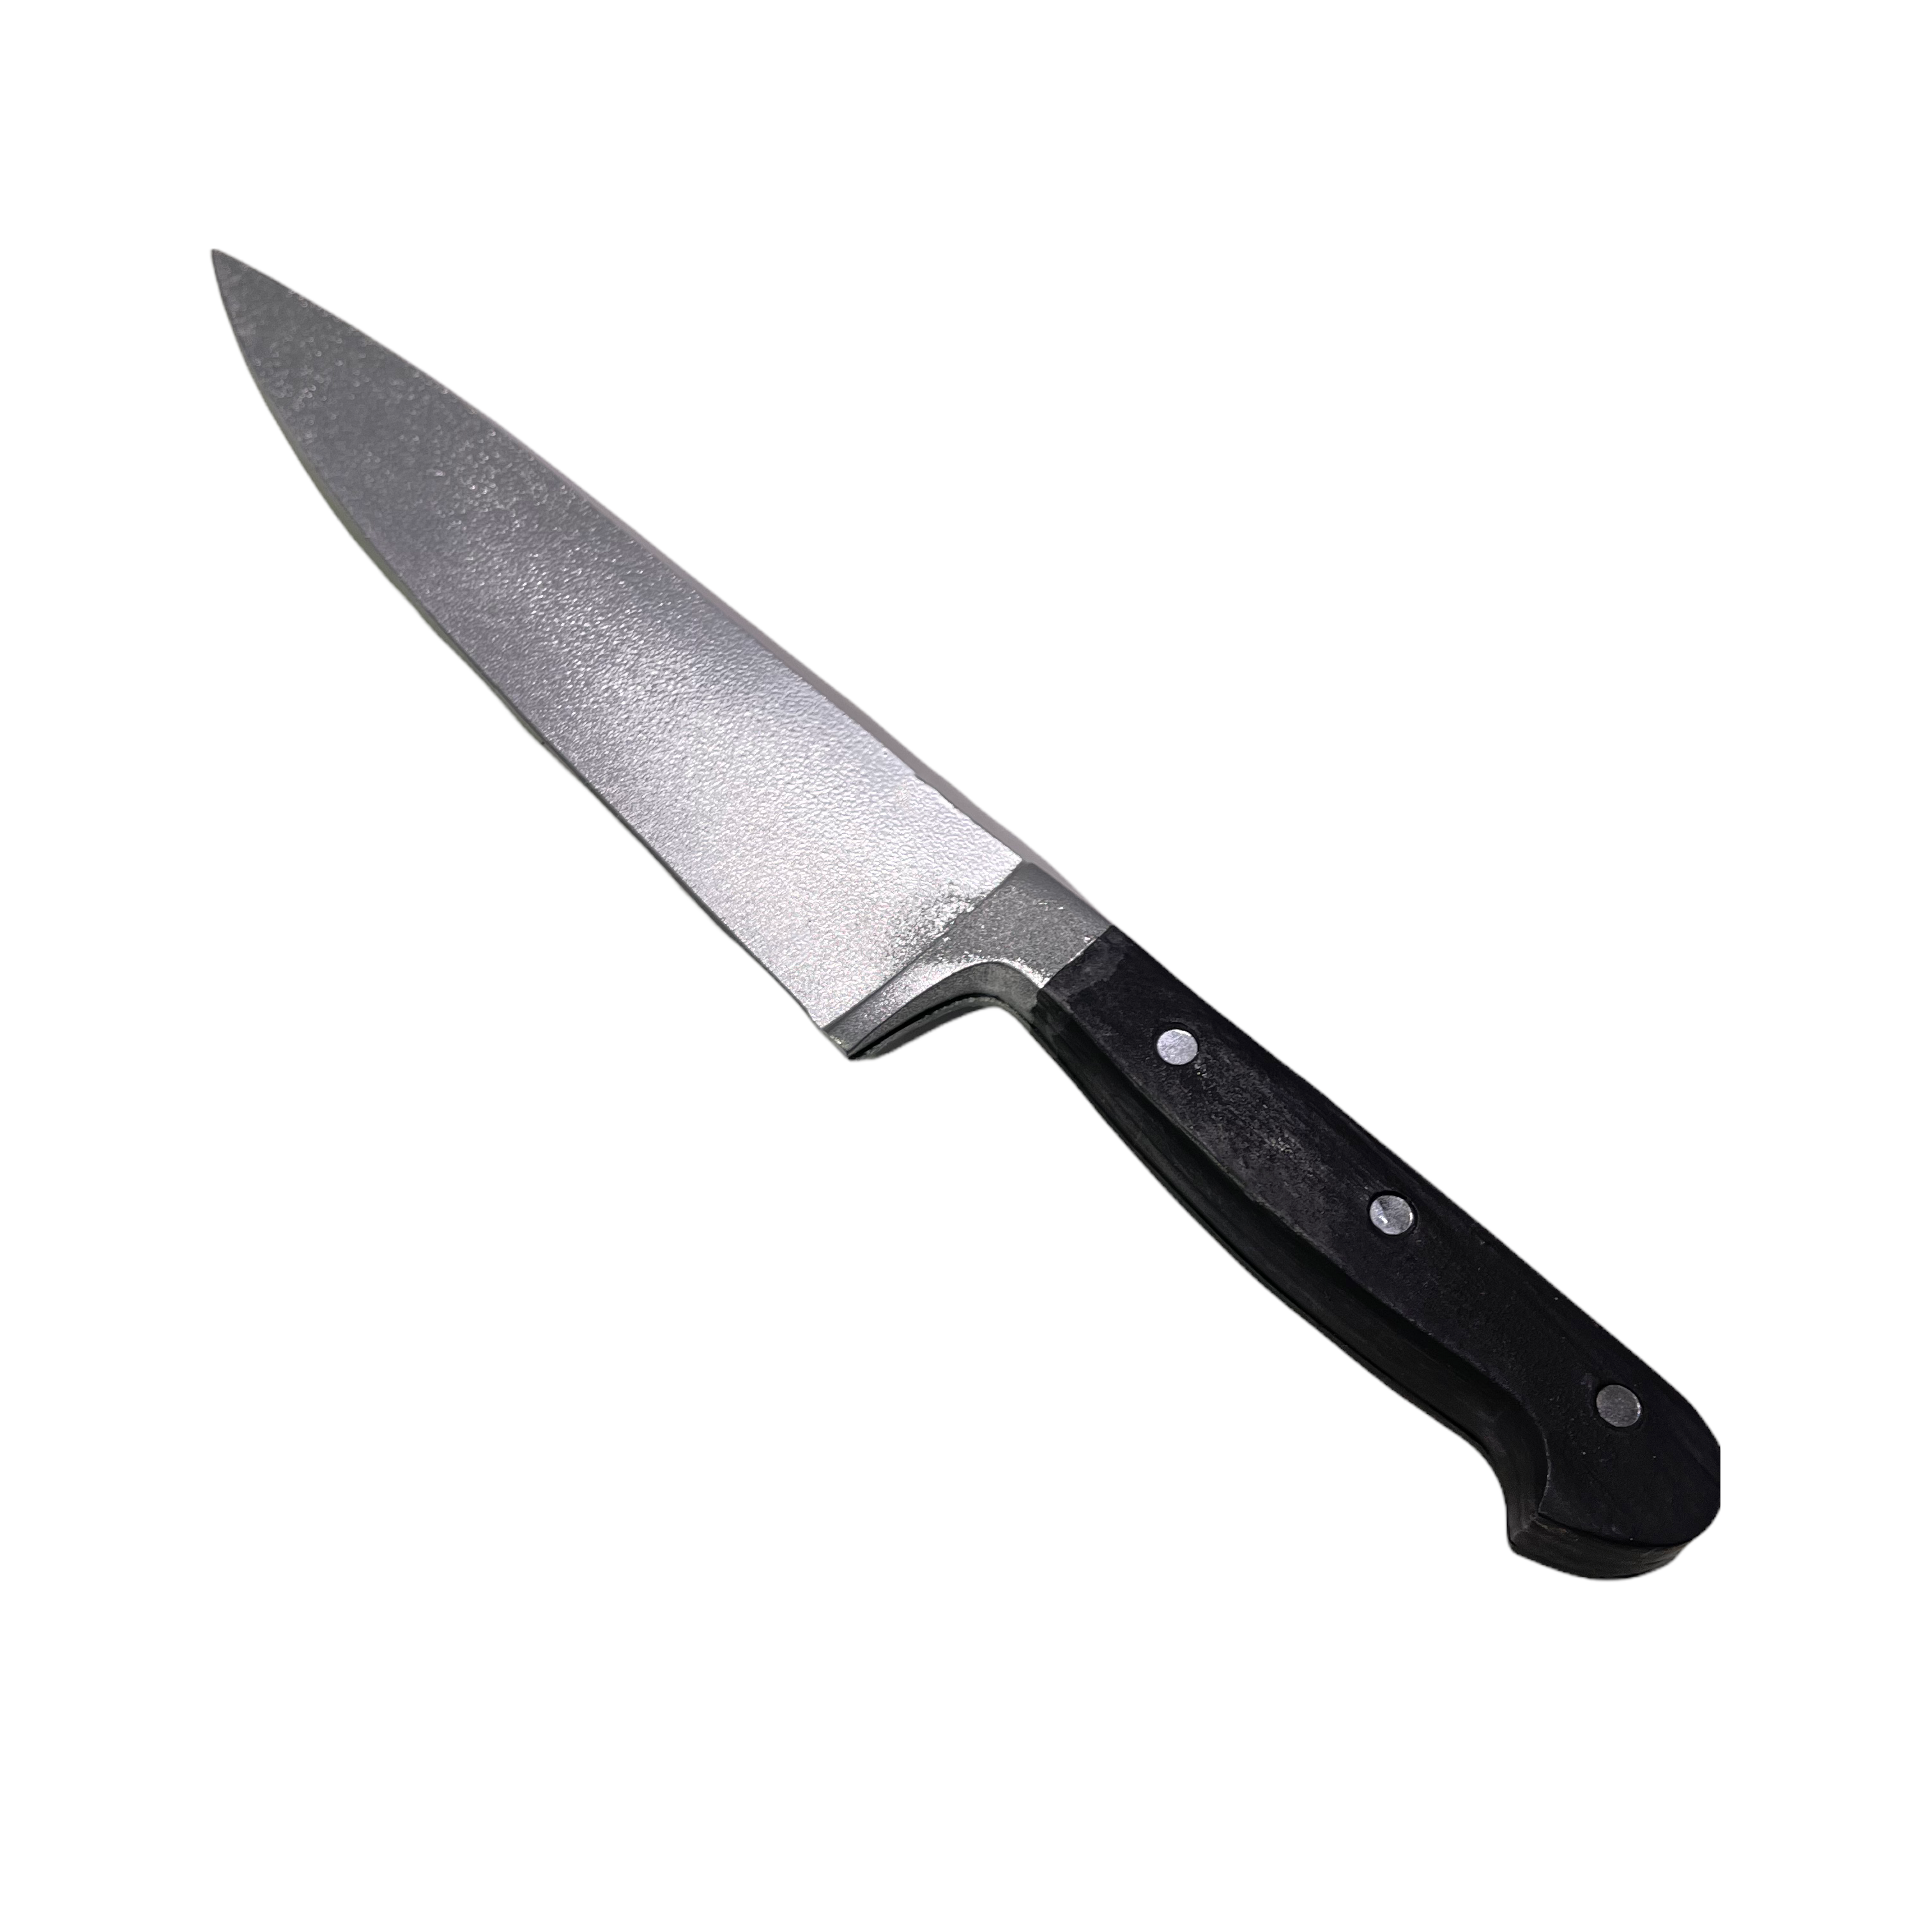 Plastic 13 Inch Chef’s Knife Silver Blade and Black Handle - New - NEW